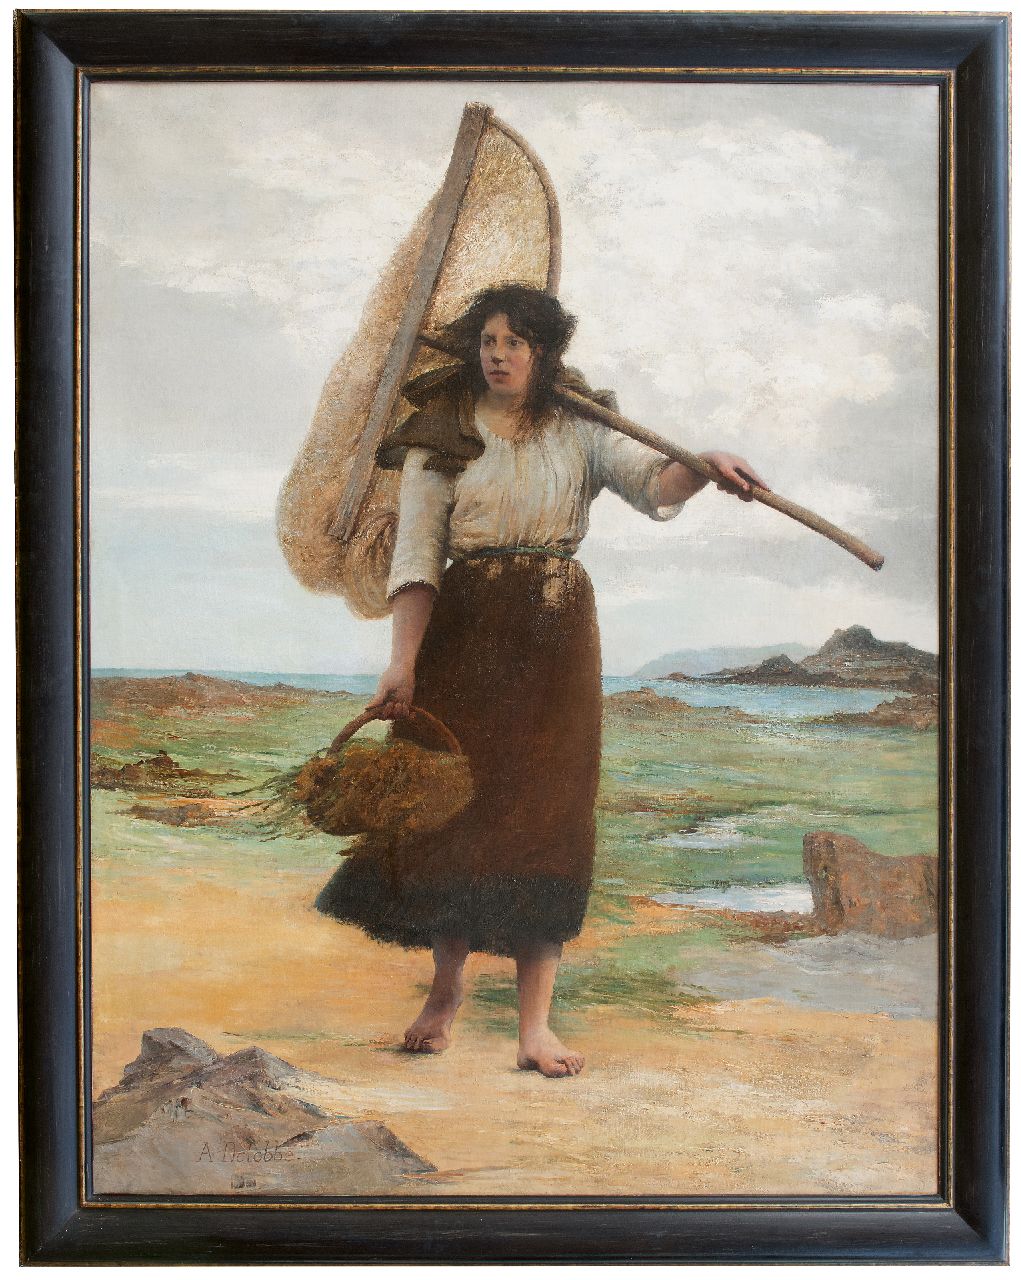 Delobbe F.A.  | François-Alfred Delobbe | Paintings offered for sale | Fisher girl, oil on canvas 248.0 x 191.0 cm, signed l.r.